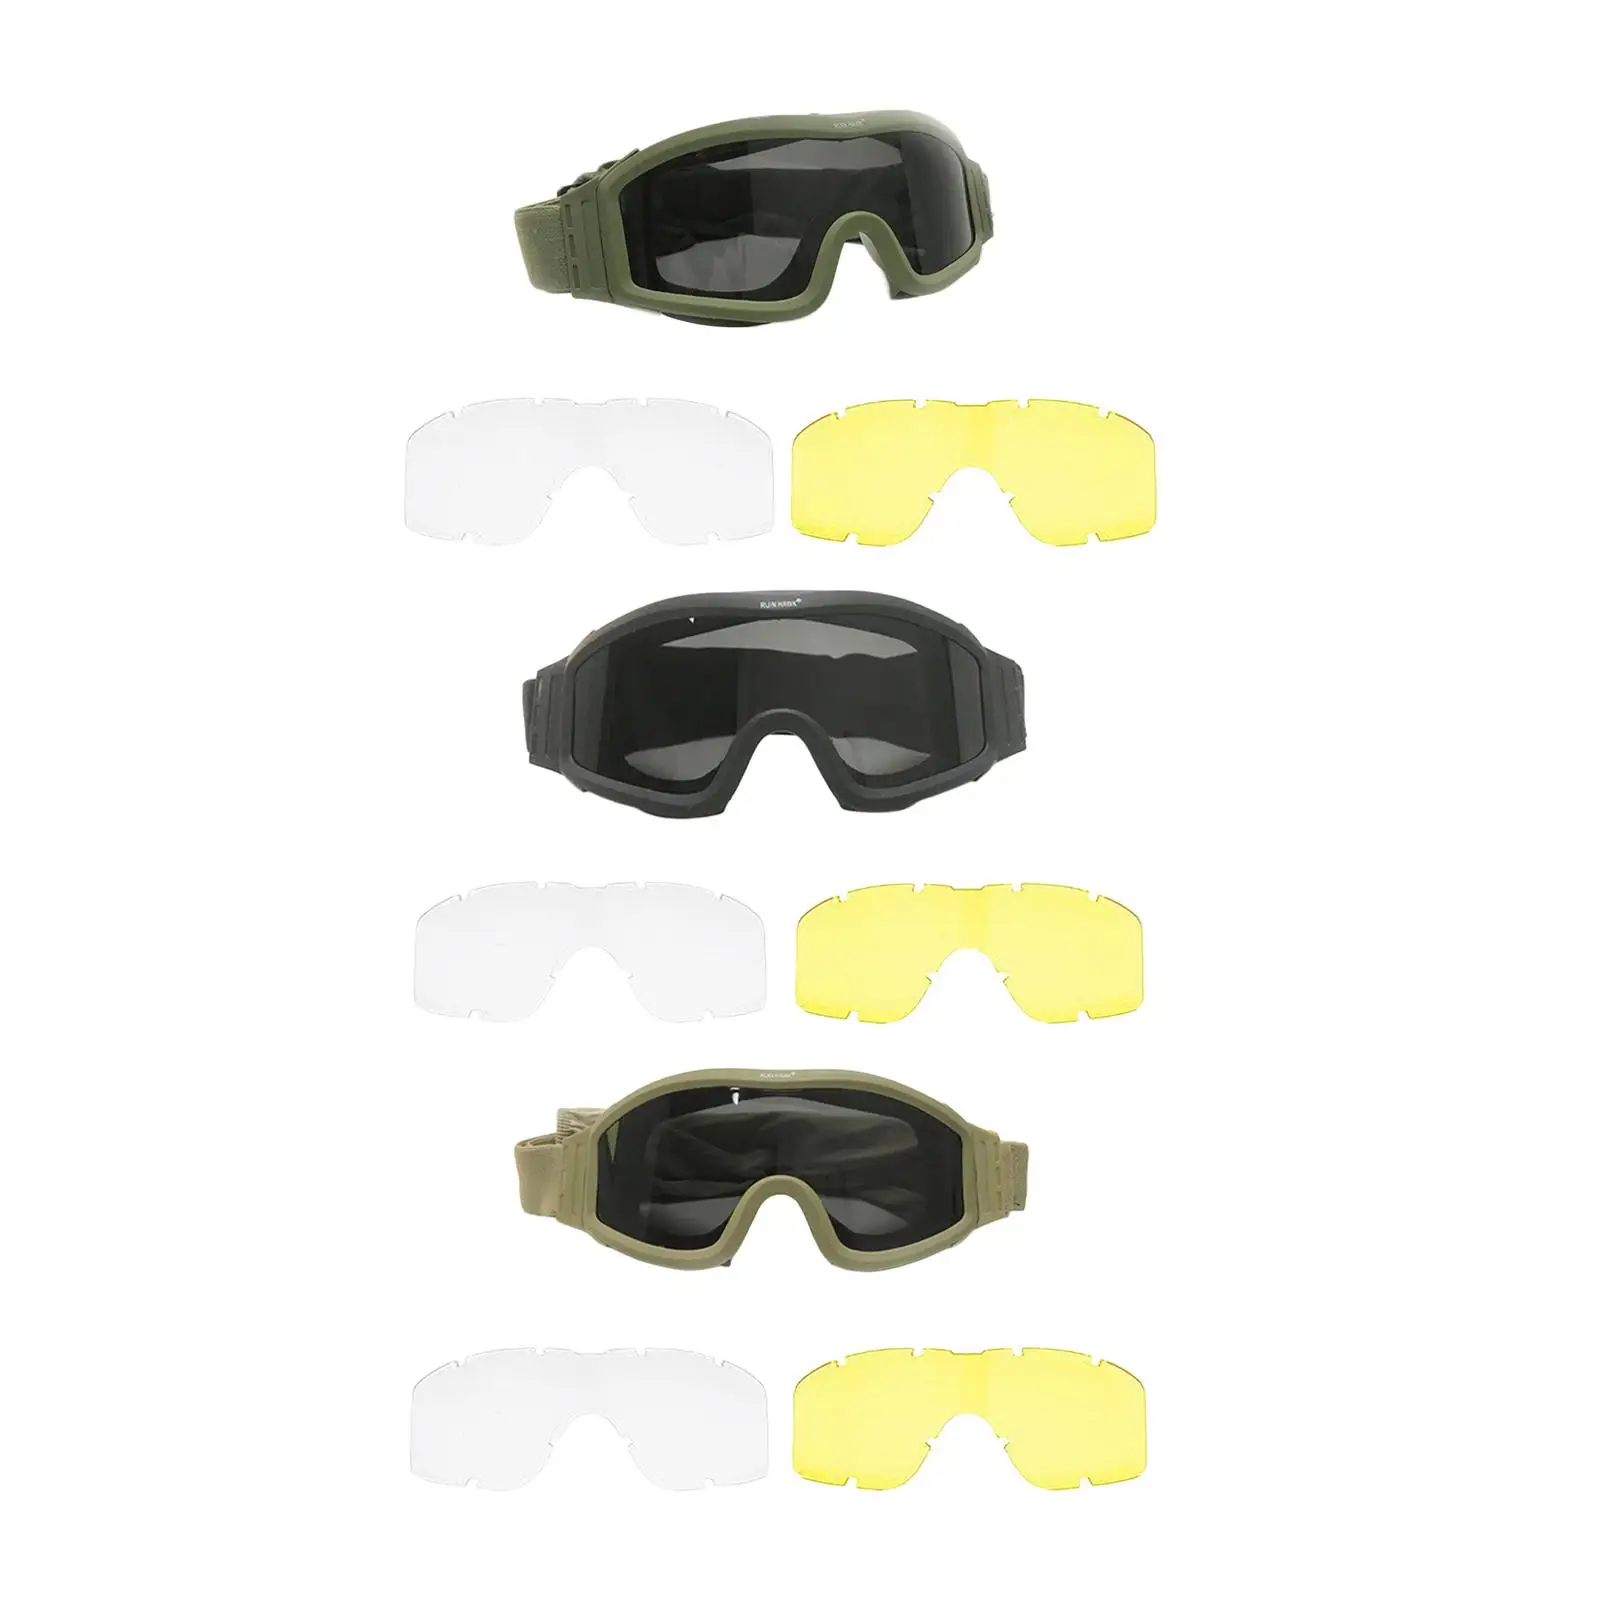 Black Transparent Yellow Goggles Glasses Dustproof Protective Interchangeable Lens Anti UV for Cycling Locust Riding Protection